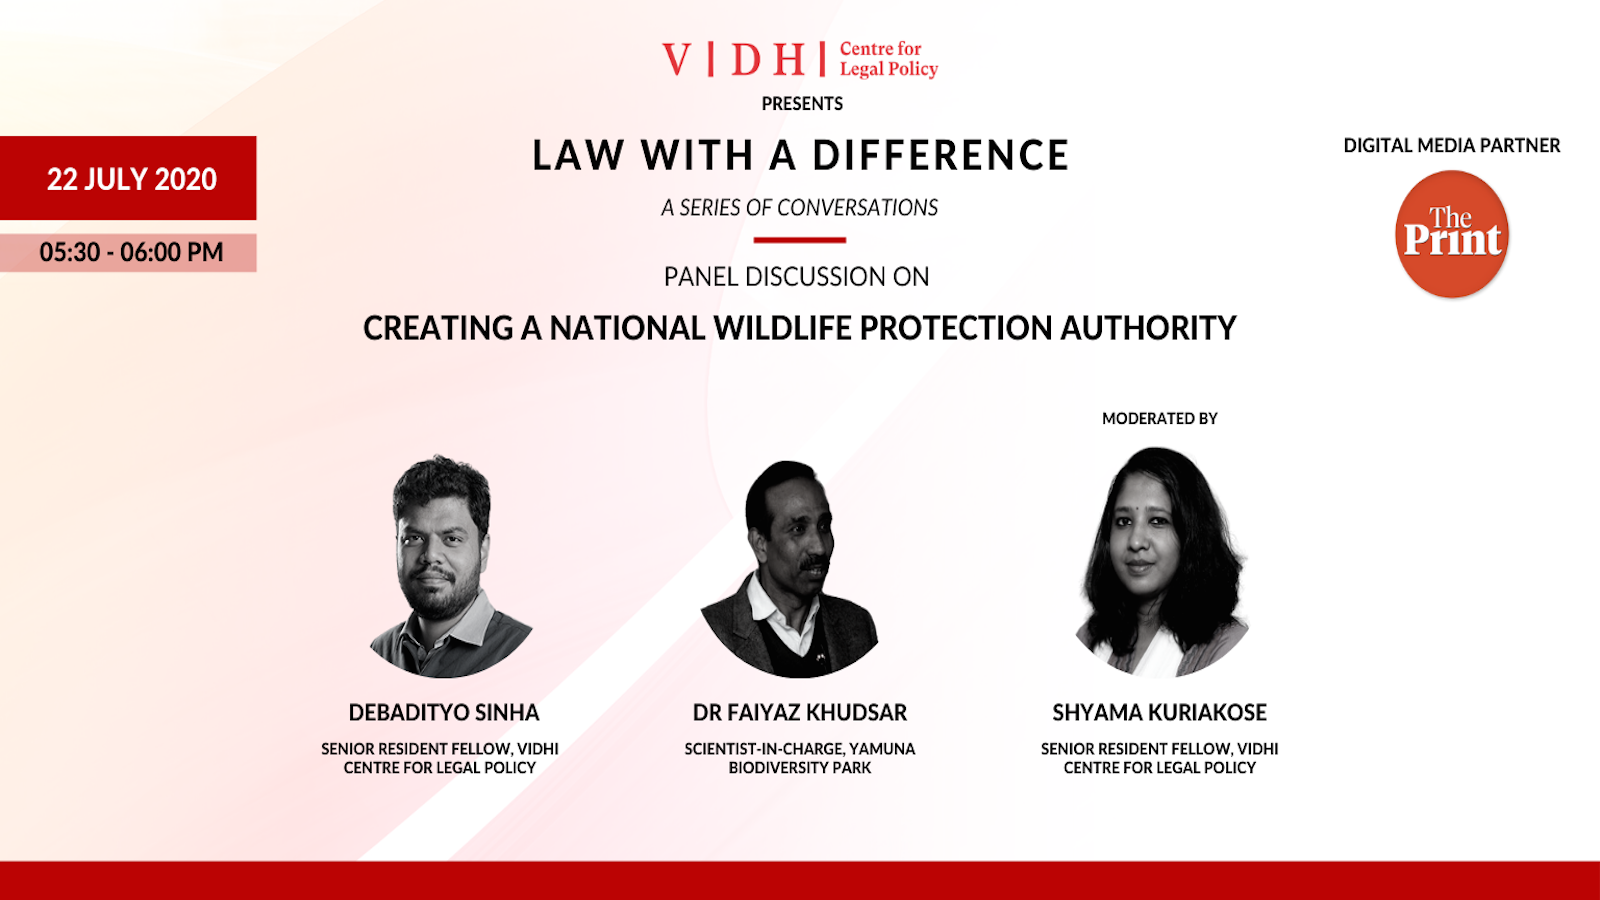 Panel discussion on 'Creating a National Wildlife Protection Authority'